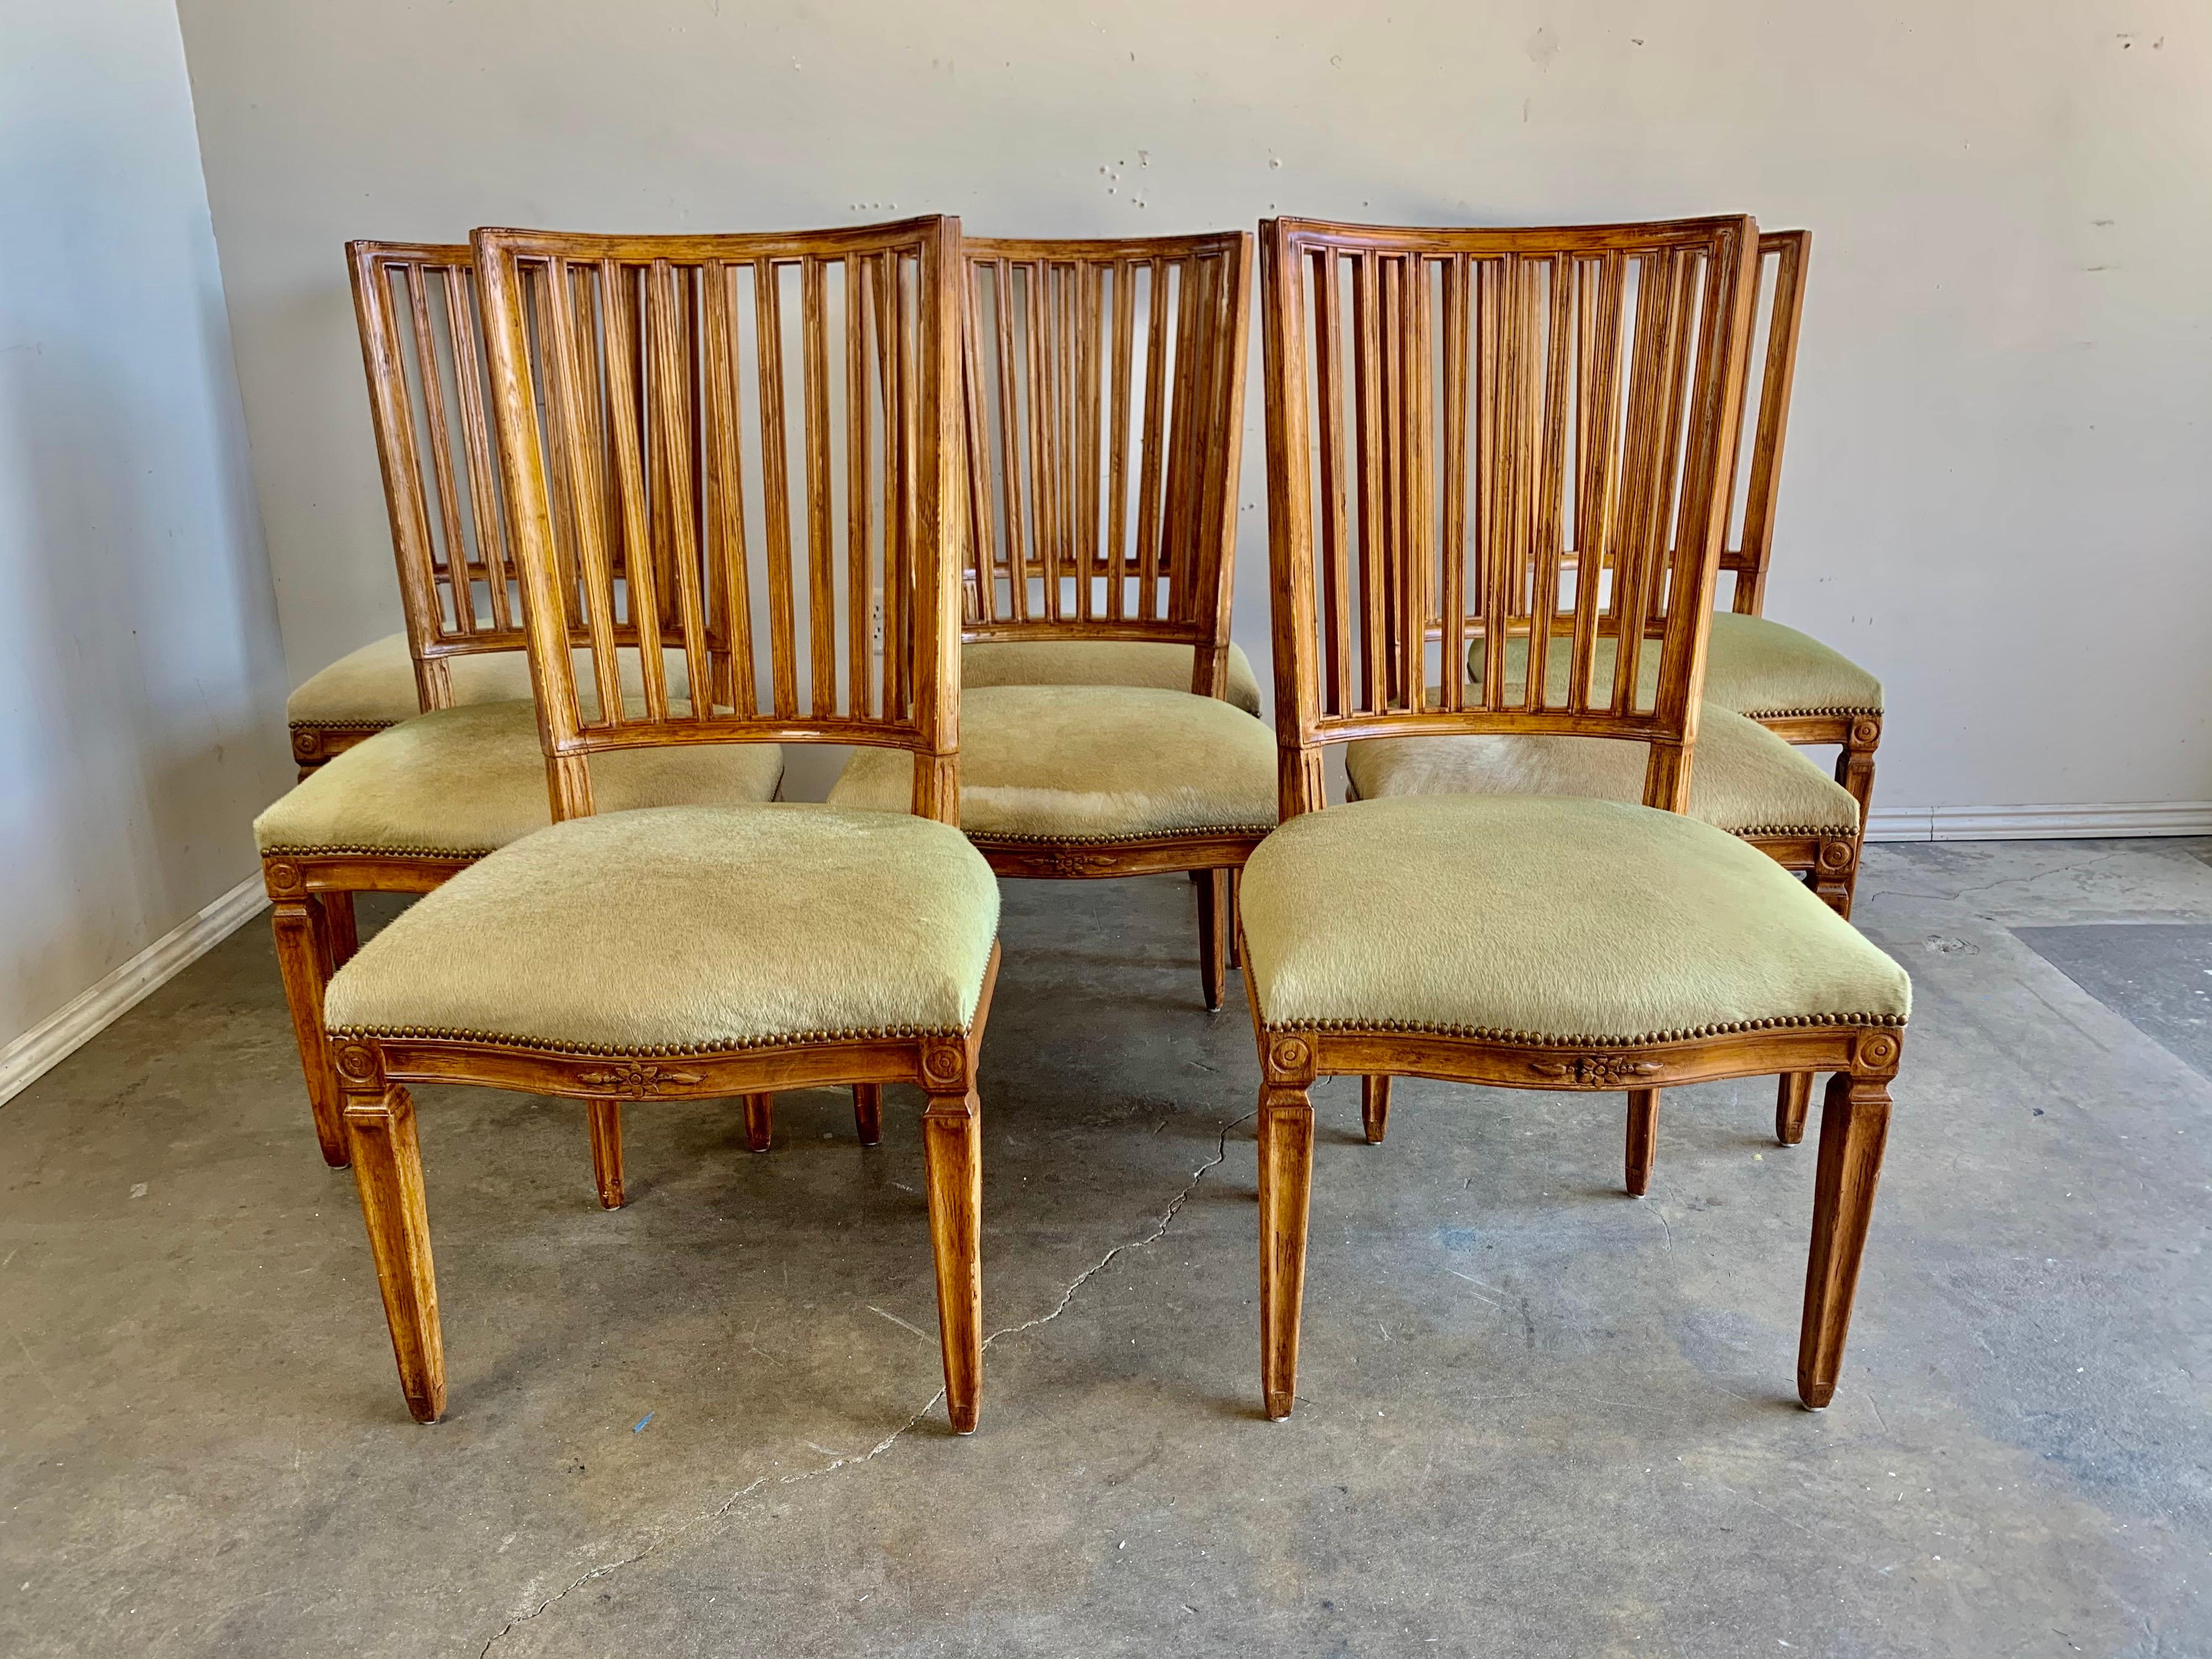 Set of (8) French Louis XVI style armchairs designed and manufactured by Rose Tarlow. The chairs stand on four straight tapered legs. The beautiful spindle style backs and legs are painted in a warm fruitwood coloration. The chairs are upholstered